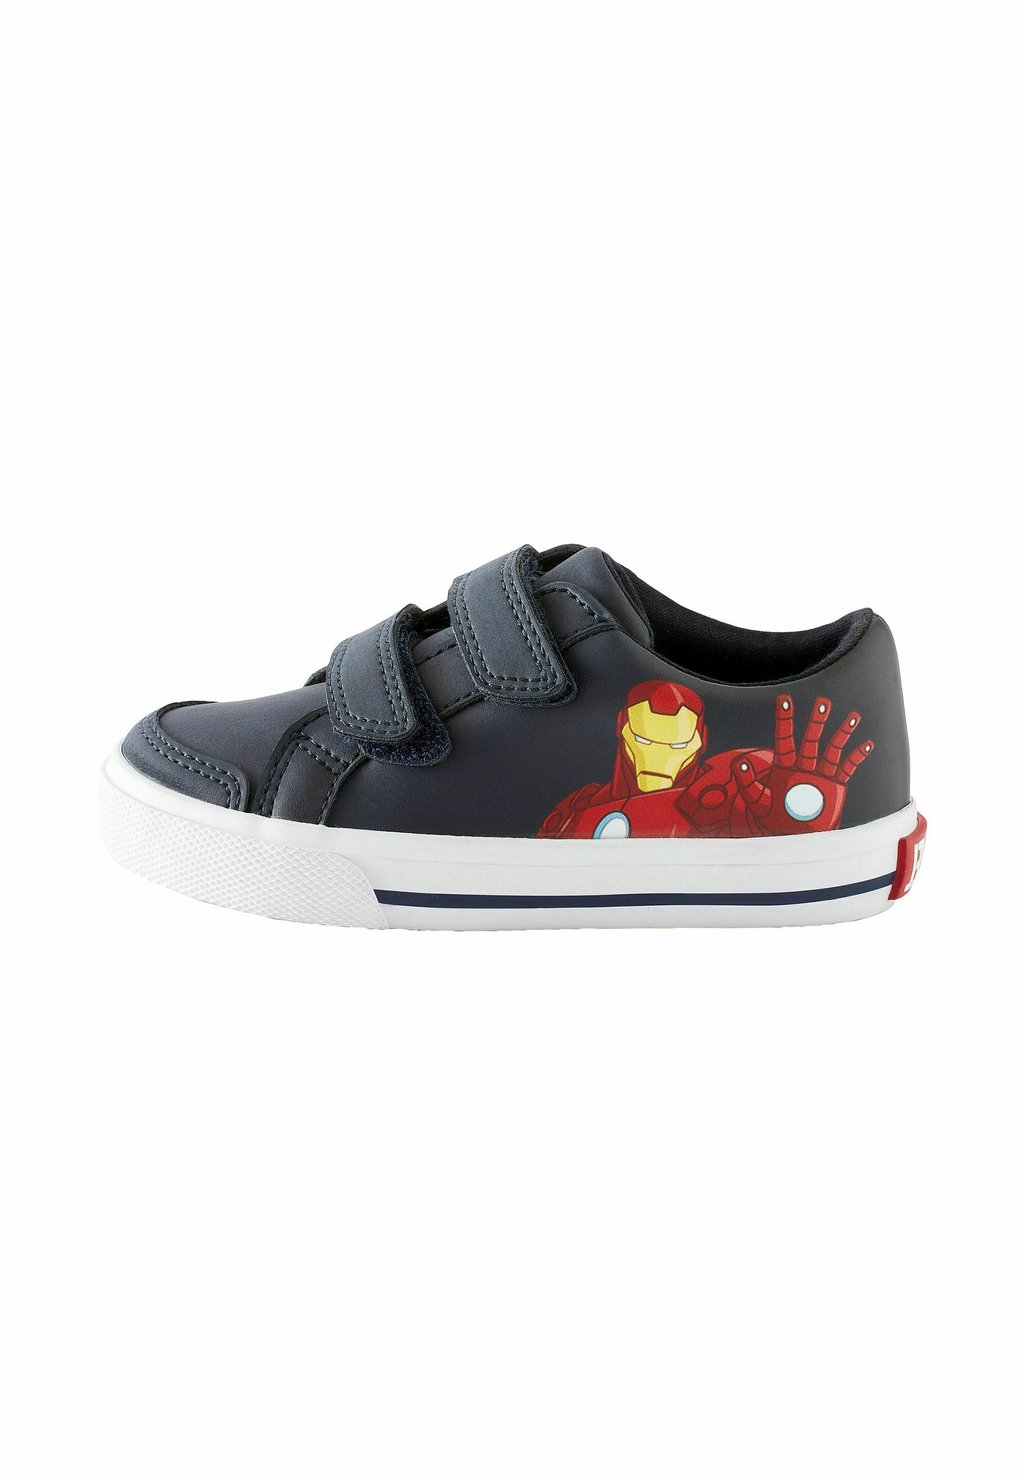 Кроссовки низкие TWO STRAP TOUCH FASTENING WIDE FIT Next, цвет navy avengers